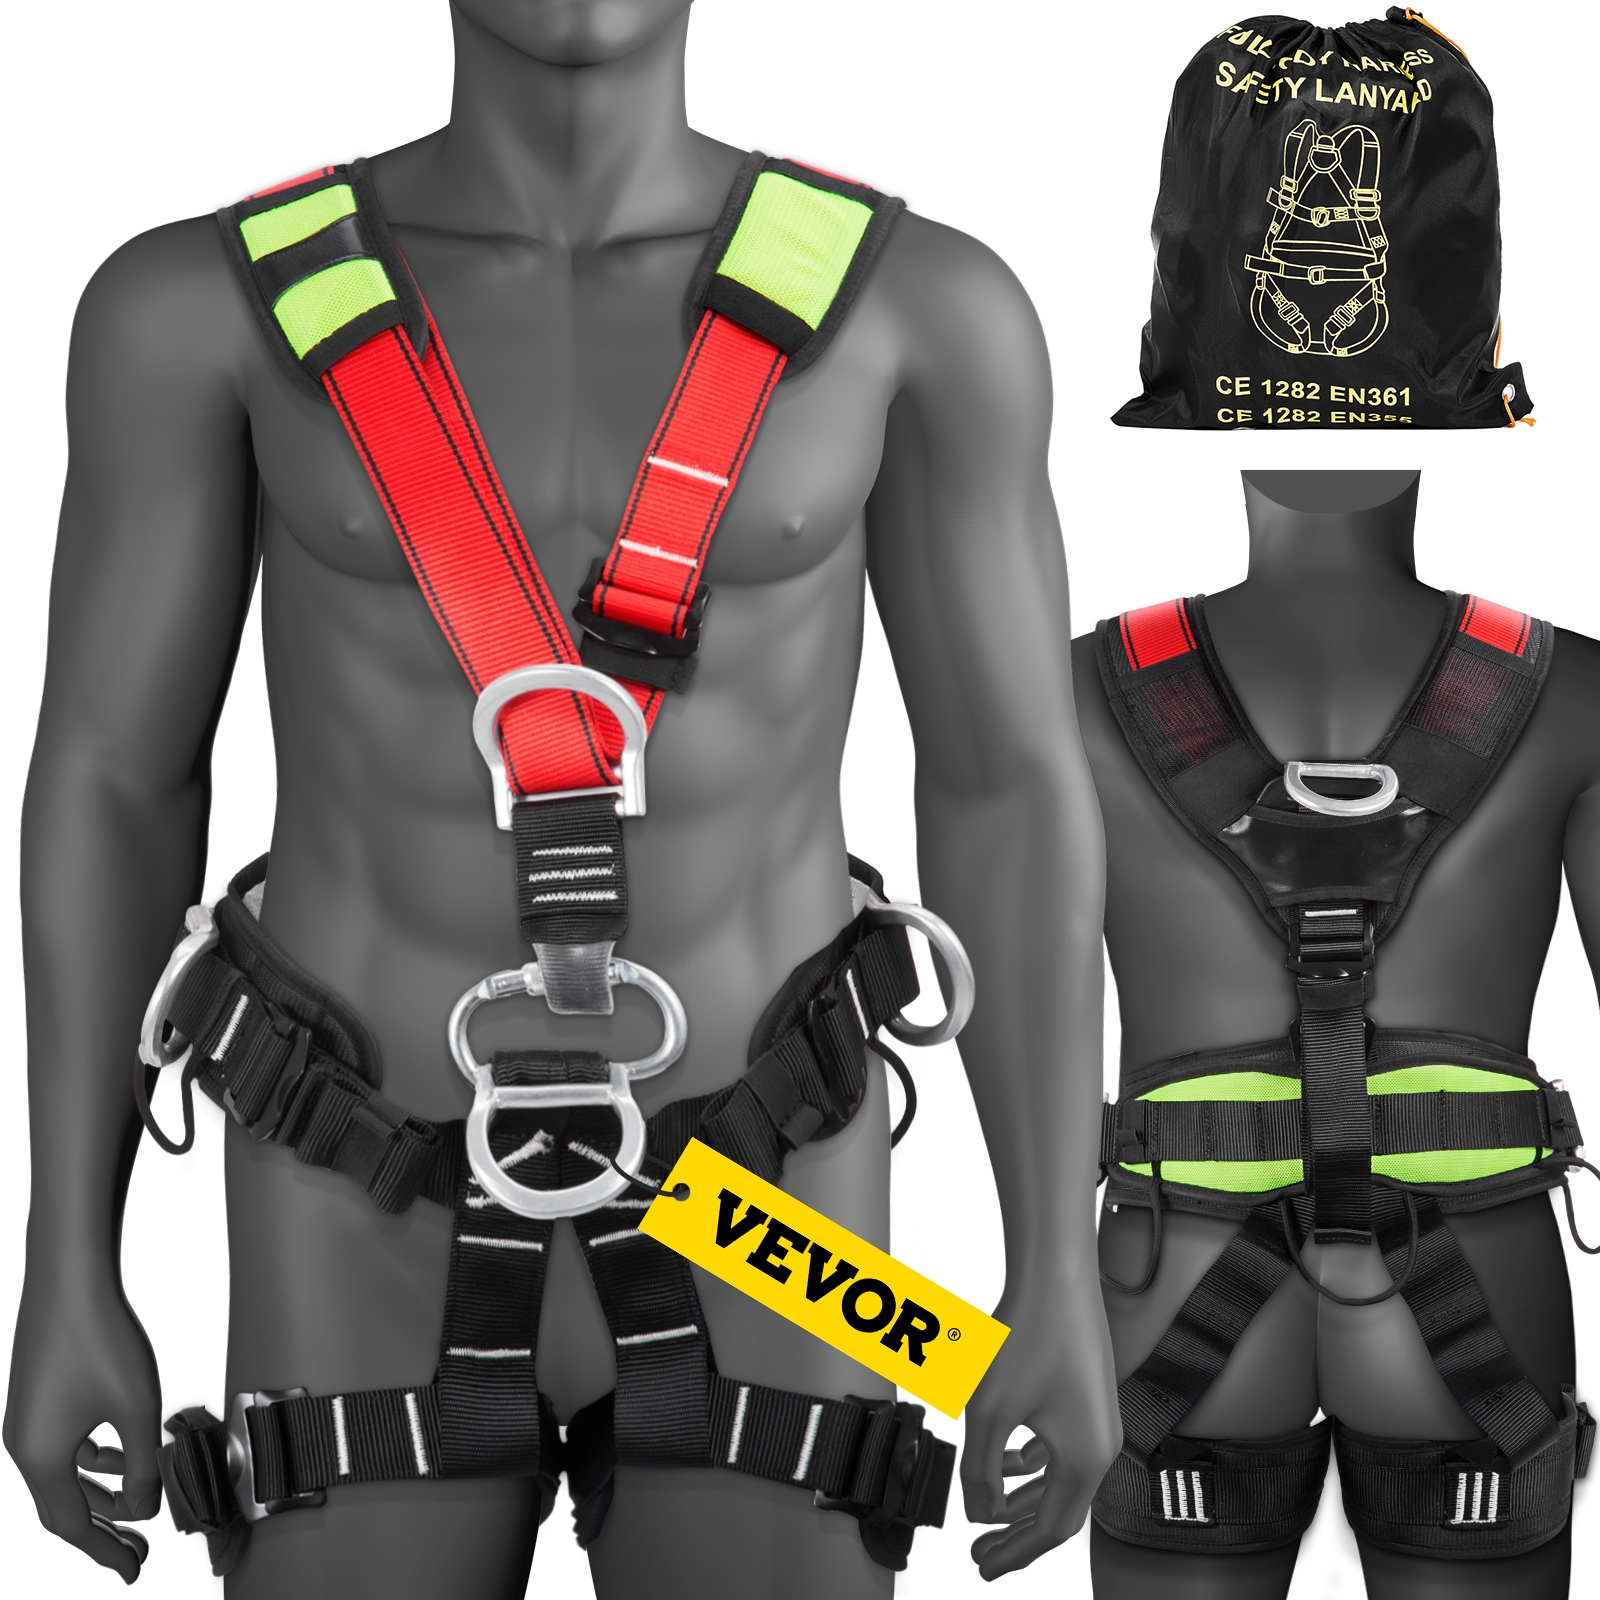 VEVOR Full Body Security Harness Plastic and Metal Commercial/Residential Rope Polyester in Black | AQSQSSAQD00000001V0